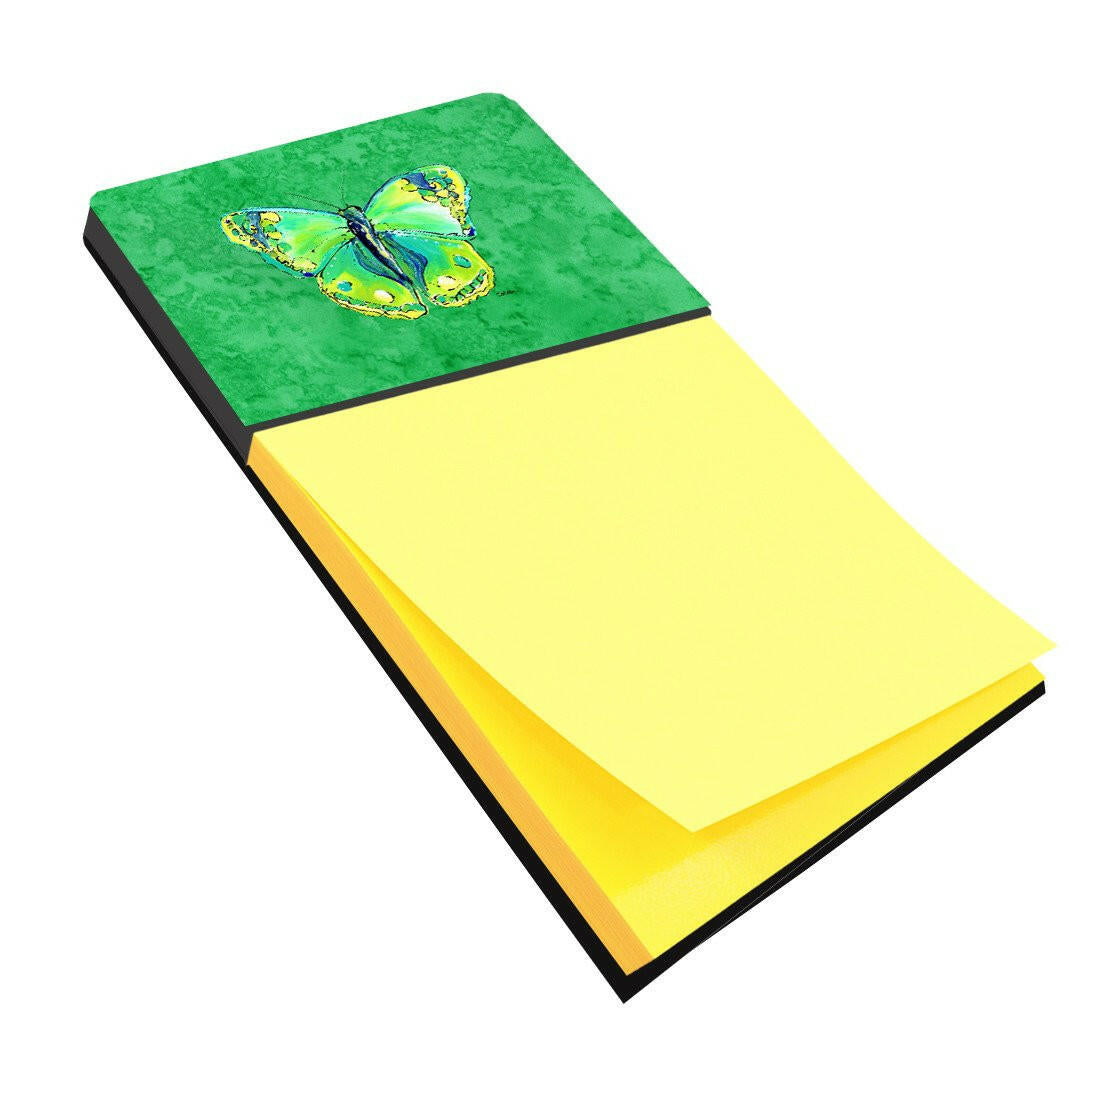 Butterfly Green on Green Refiillable Sticky Note Holder or Postit Note Dispenser 8863SN by Caroline's Treasures